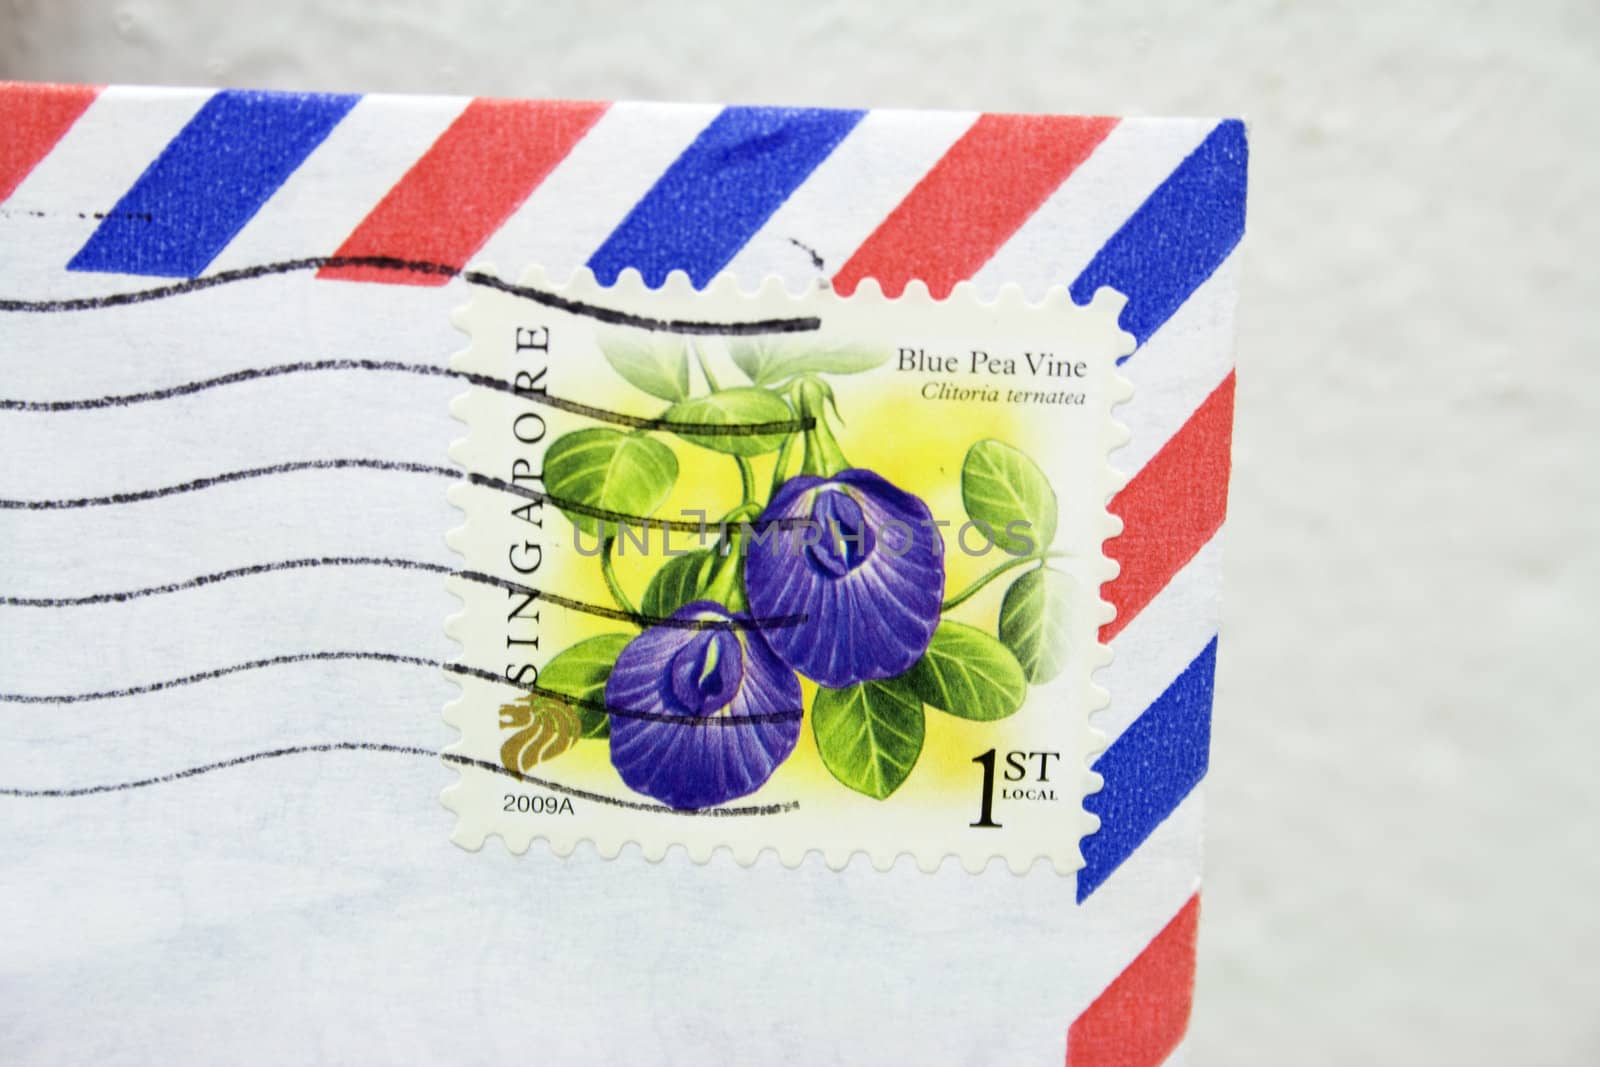 Corner of an airmail envelop with Singapore Postage.